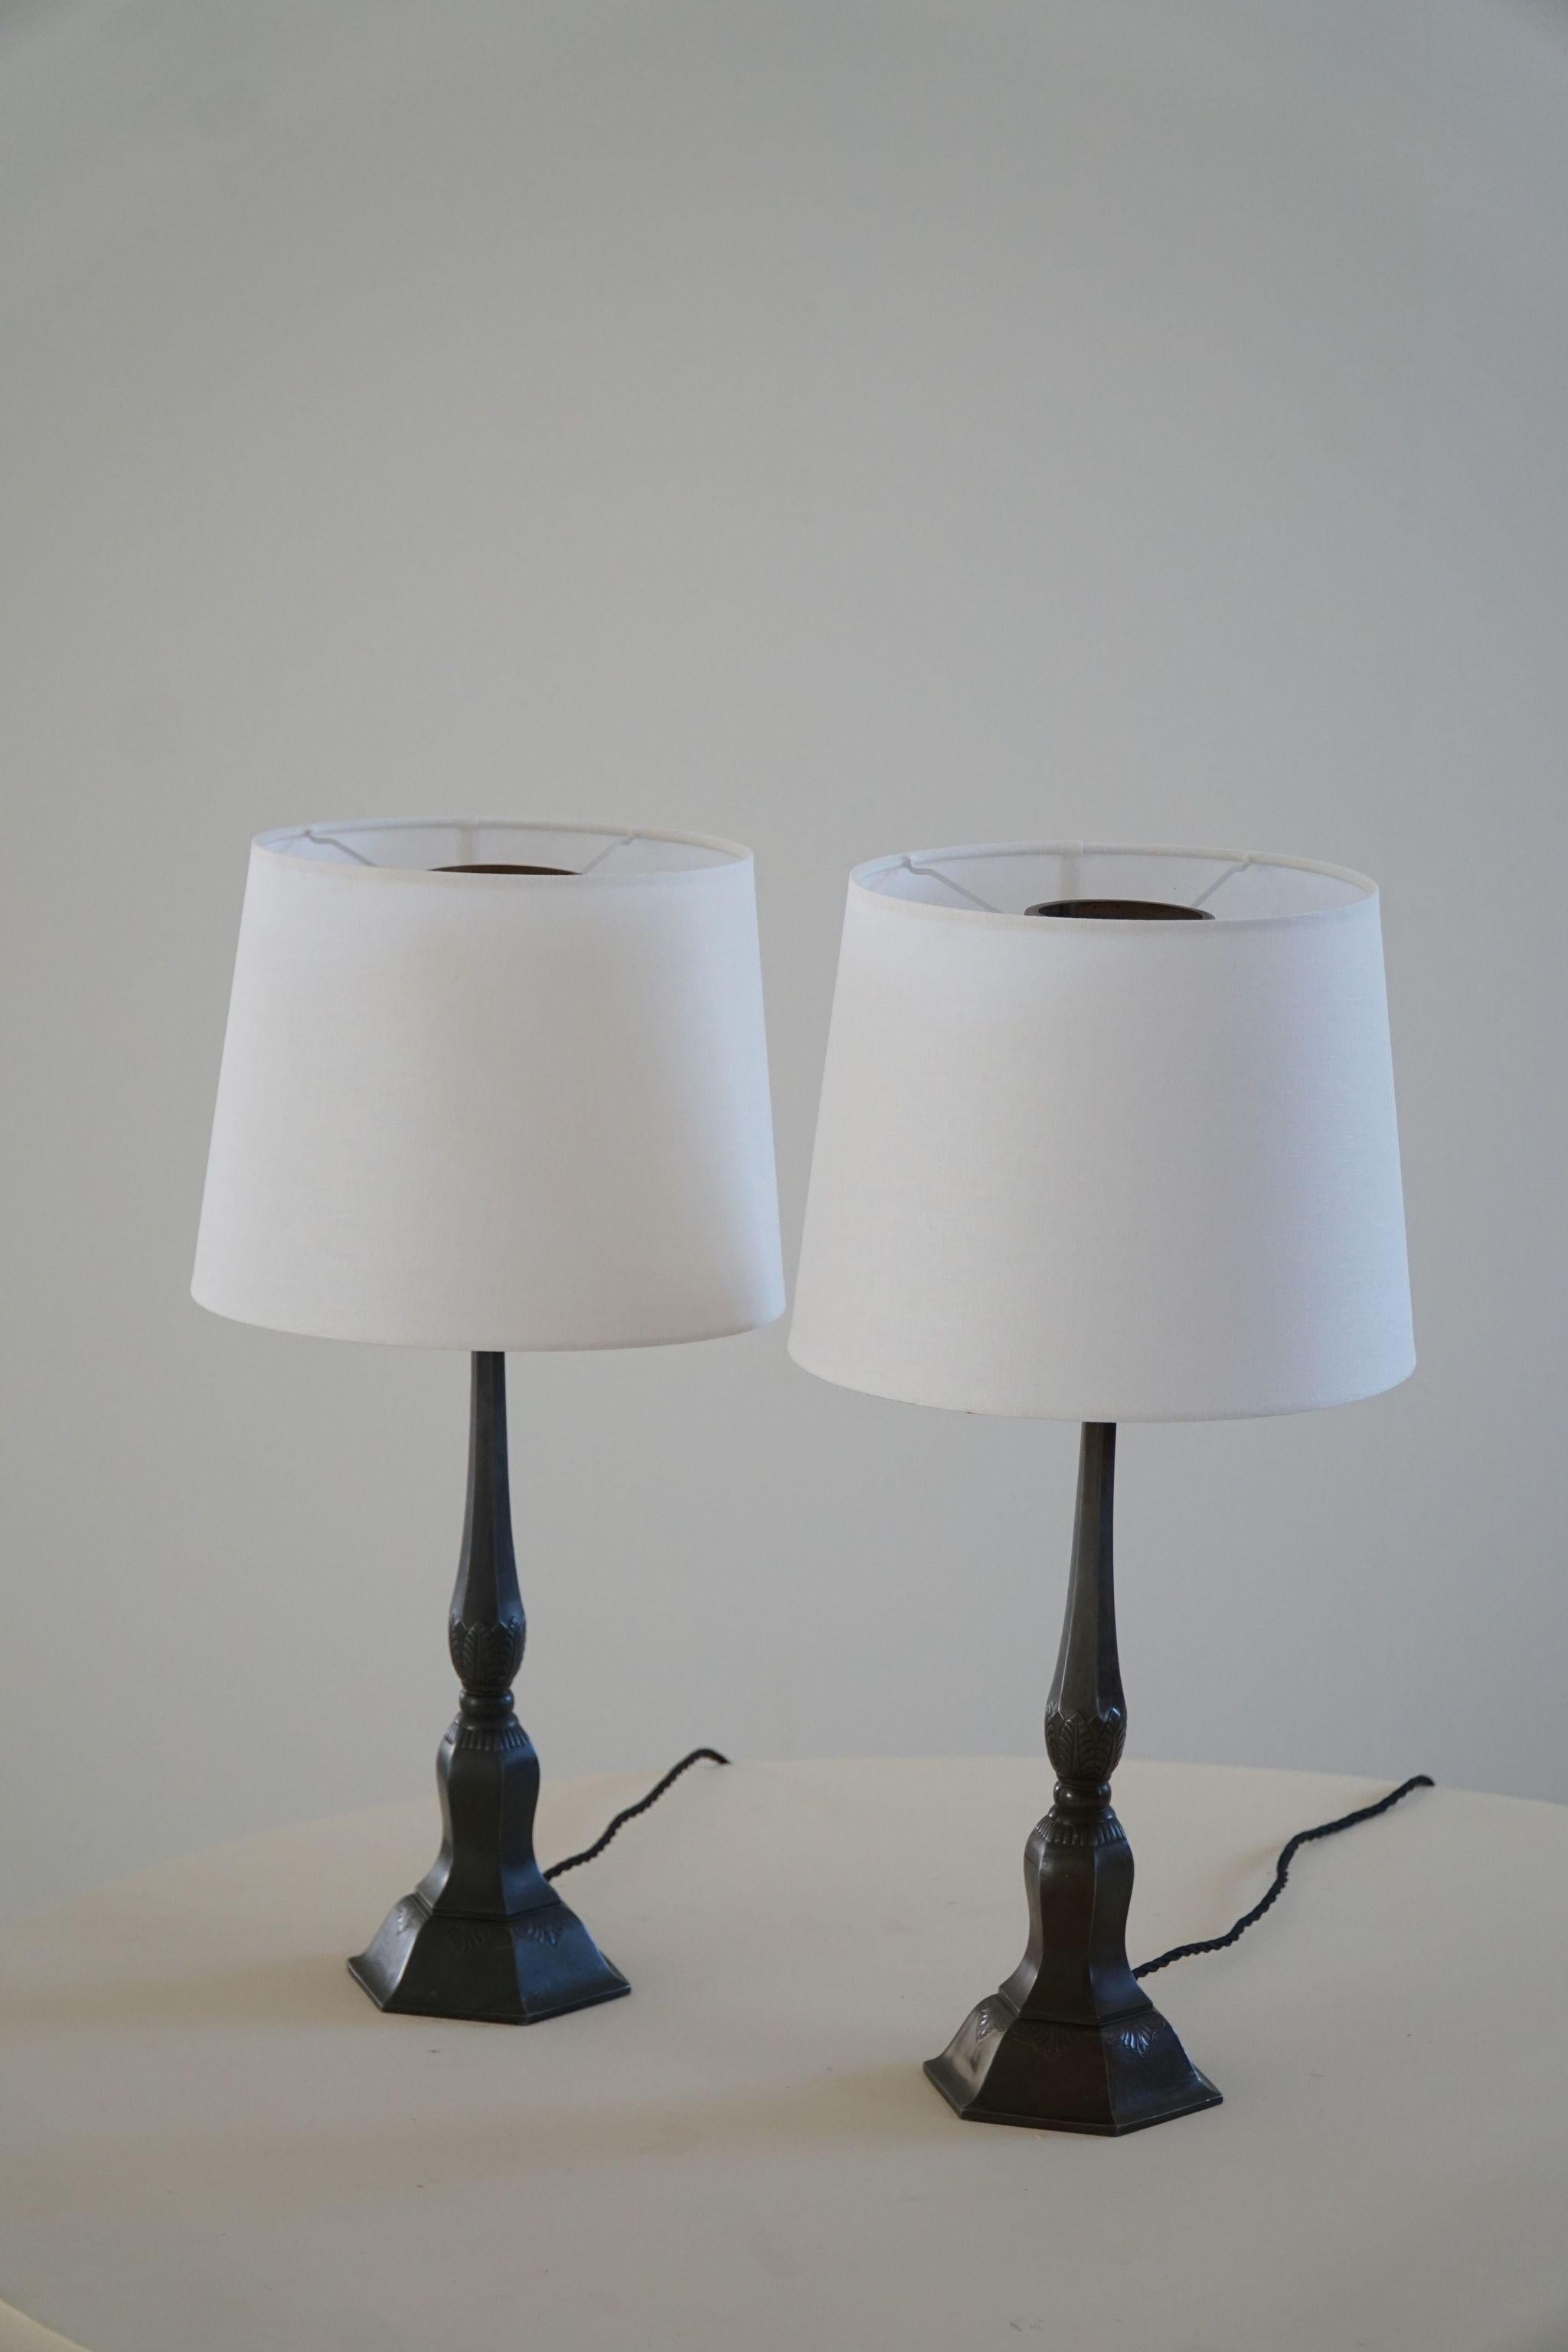 A Pair of Danish Modern Table Lamps from Just Andersen in Diskometal, 1920s For Sale 3